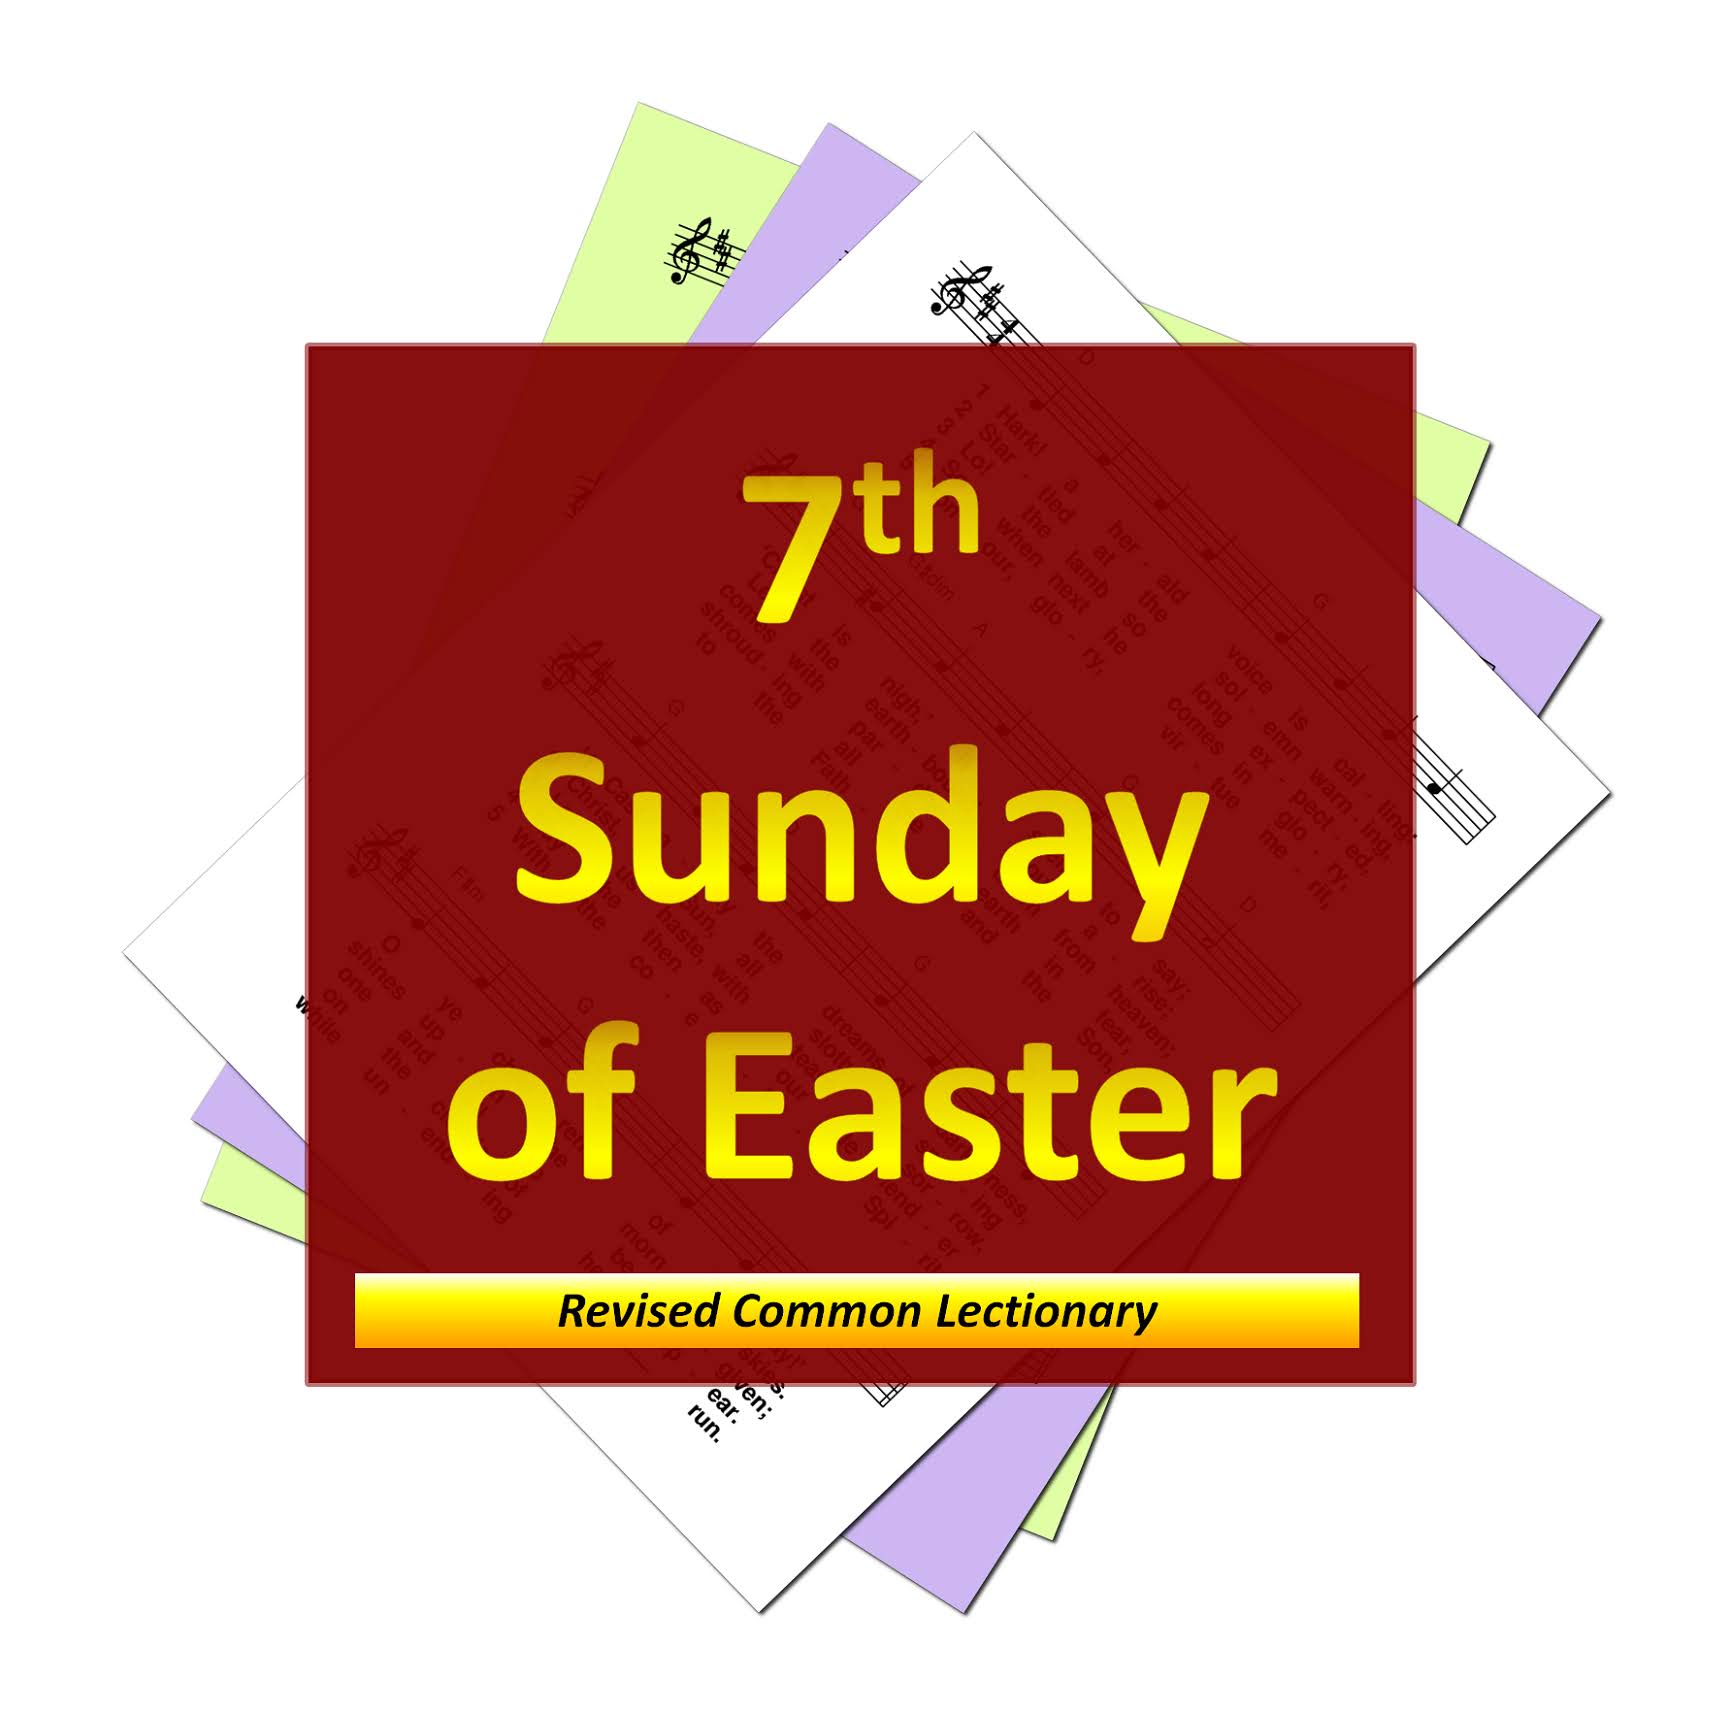 Hymns for the 7th Sunday of Easter, Year A Revised